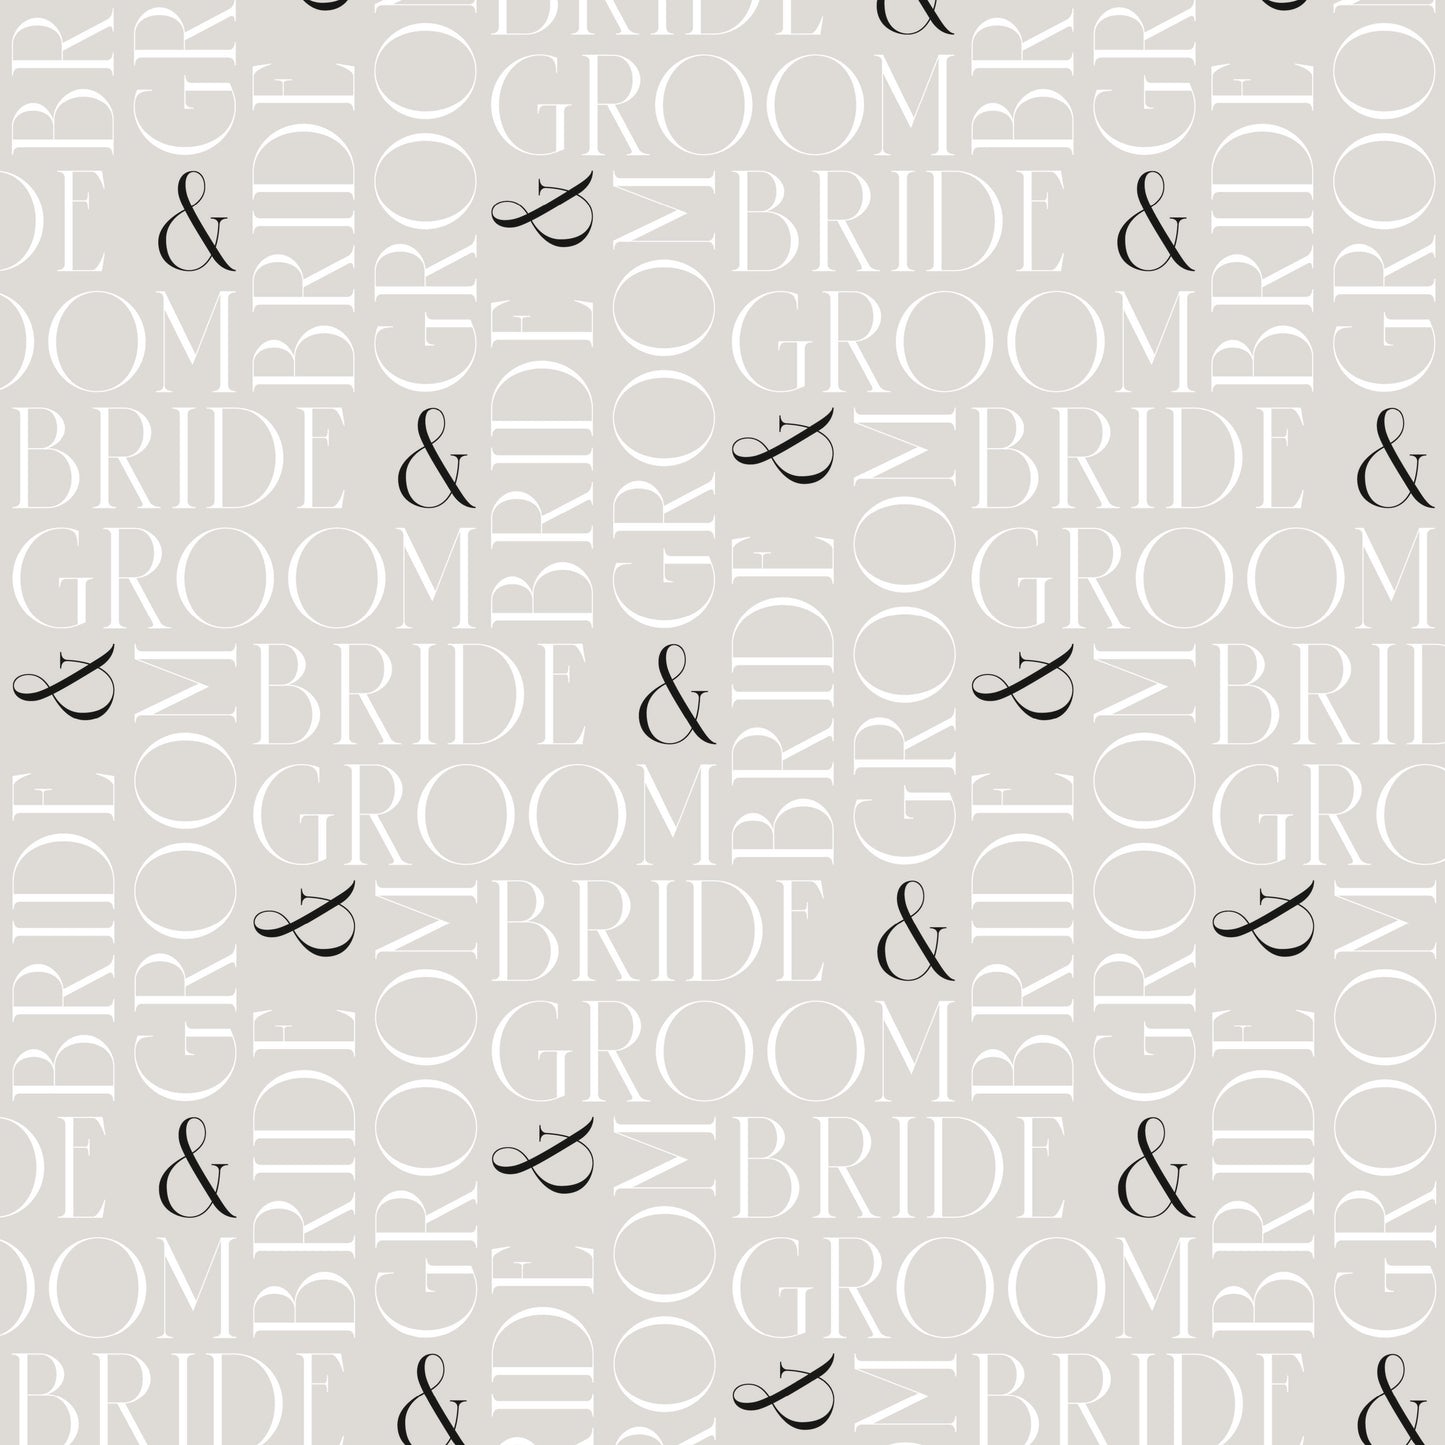 Bride & Groom Wrapping Paper Sheets